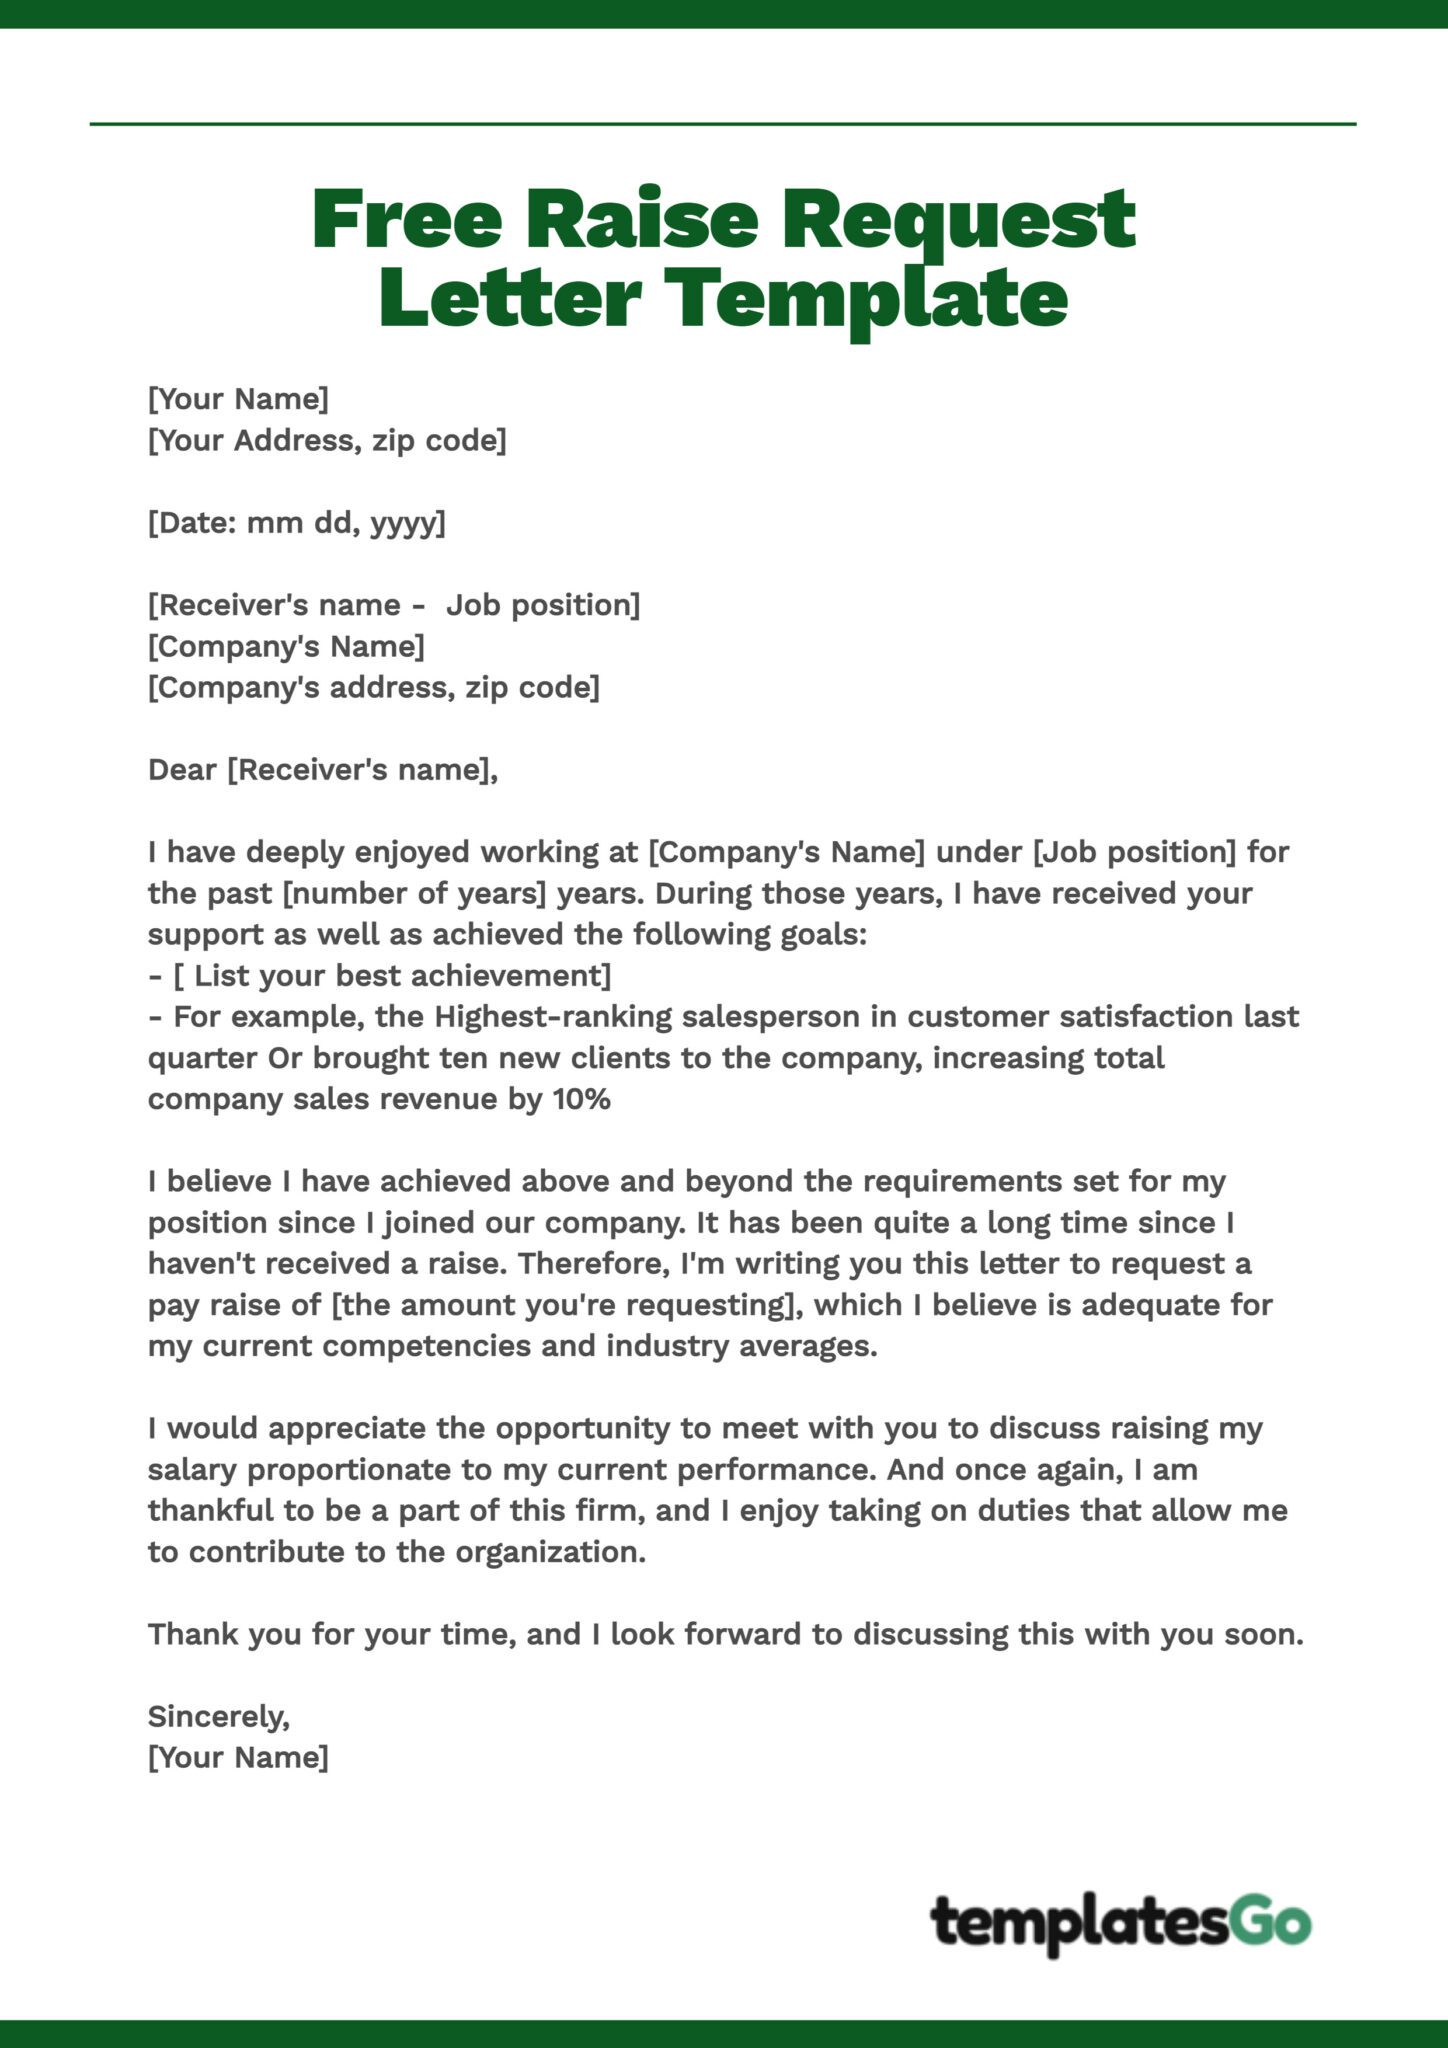 how-to-write-a-raise-request-letter-with-free-template